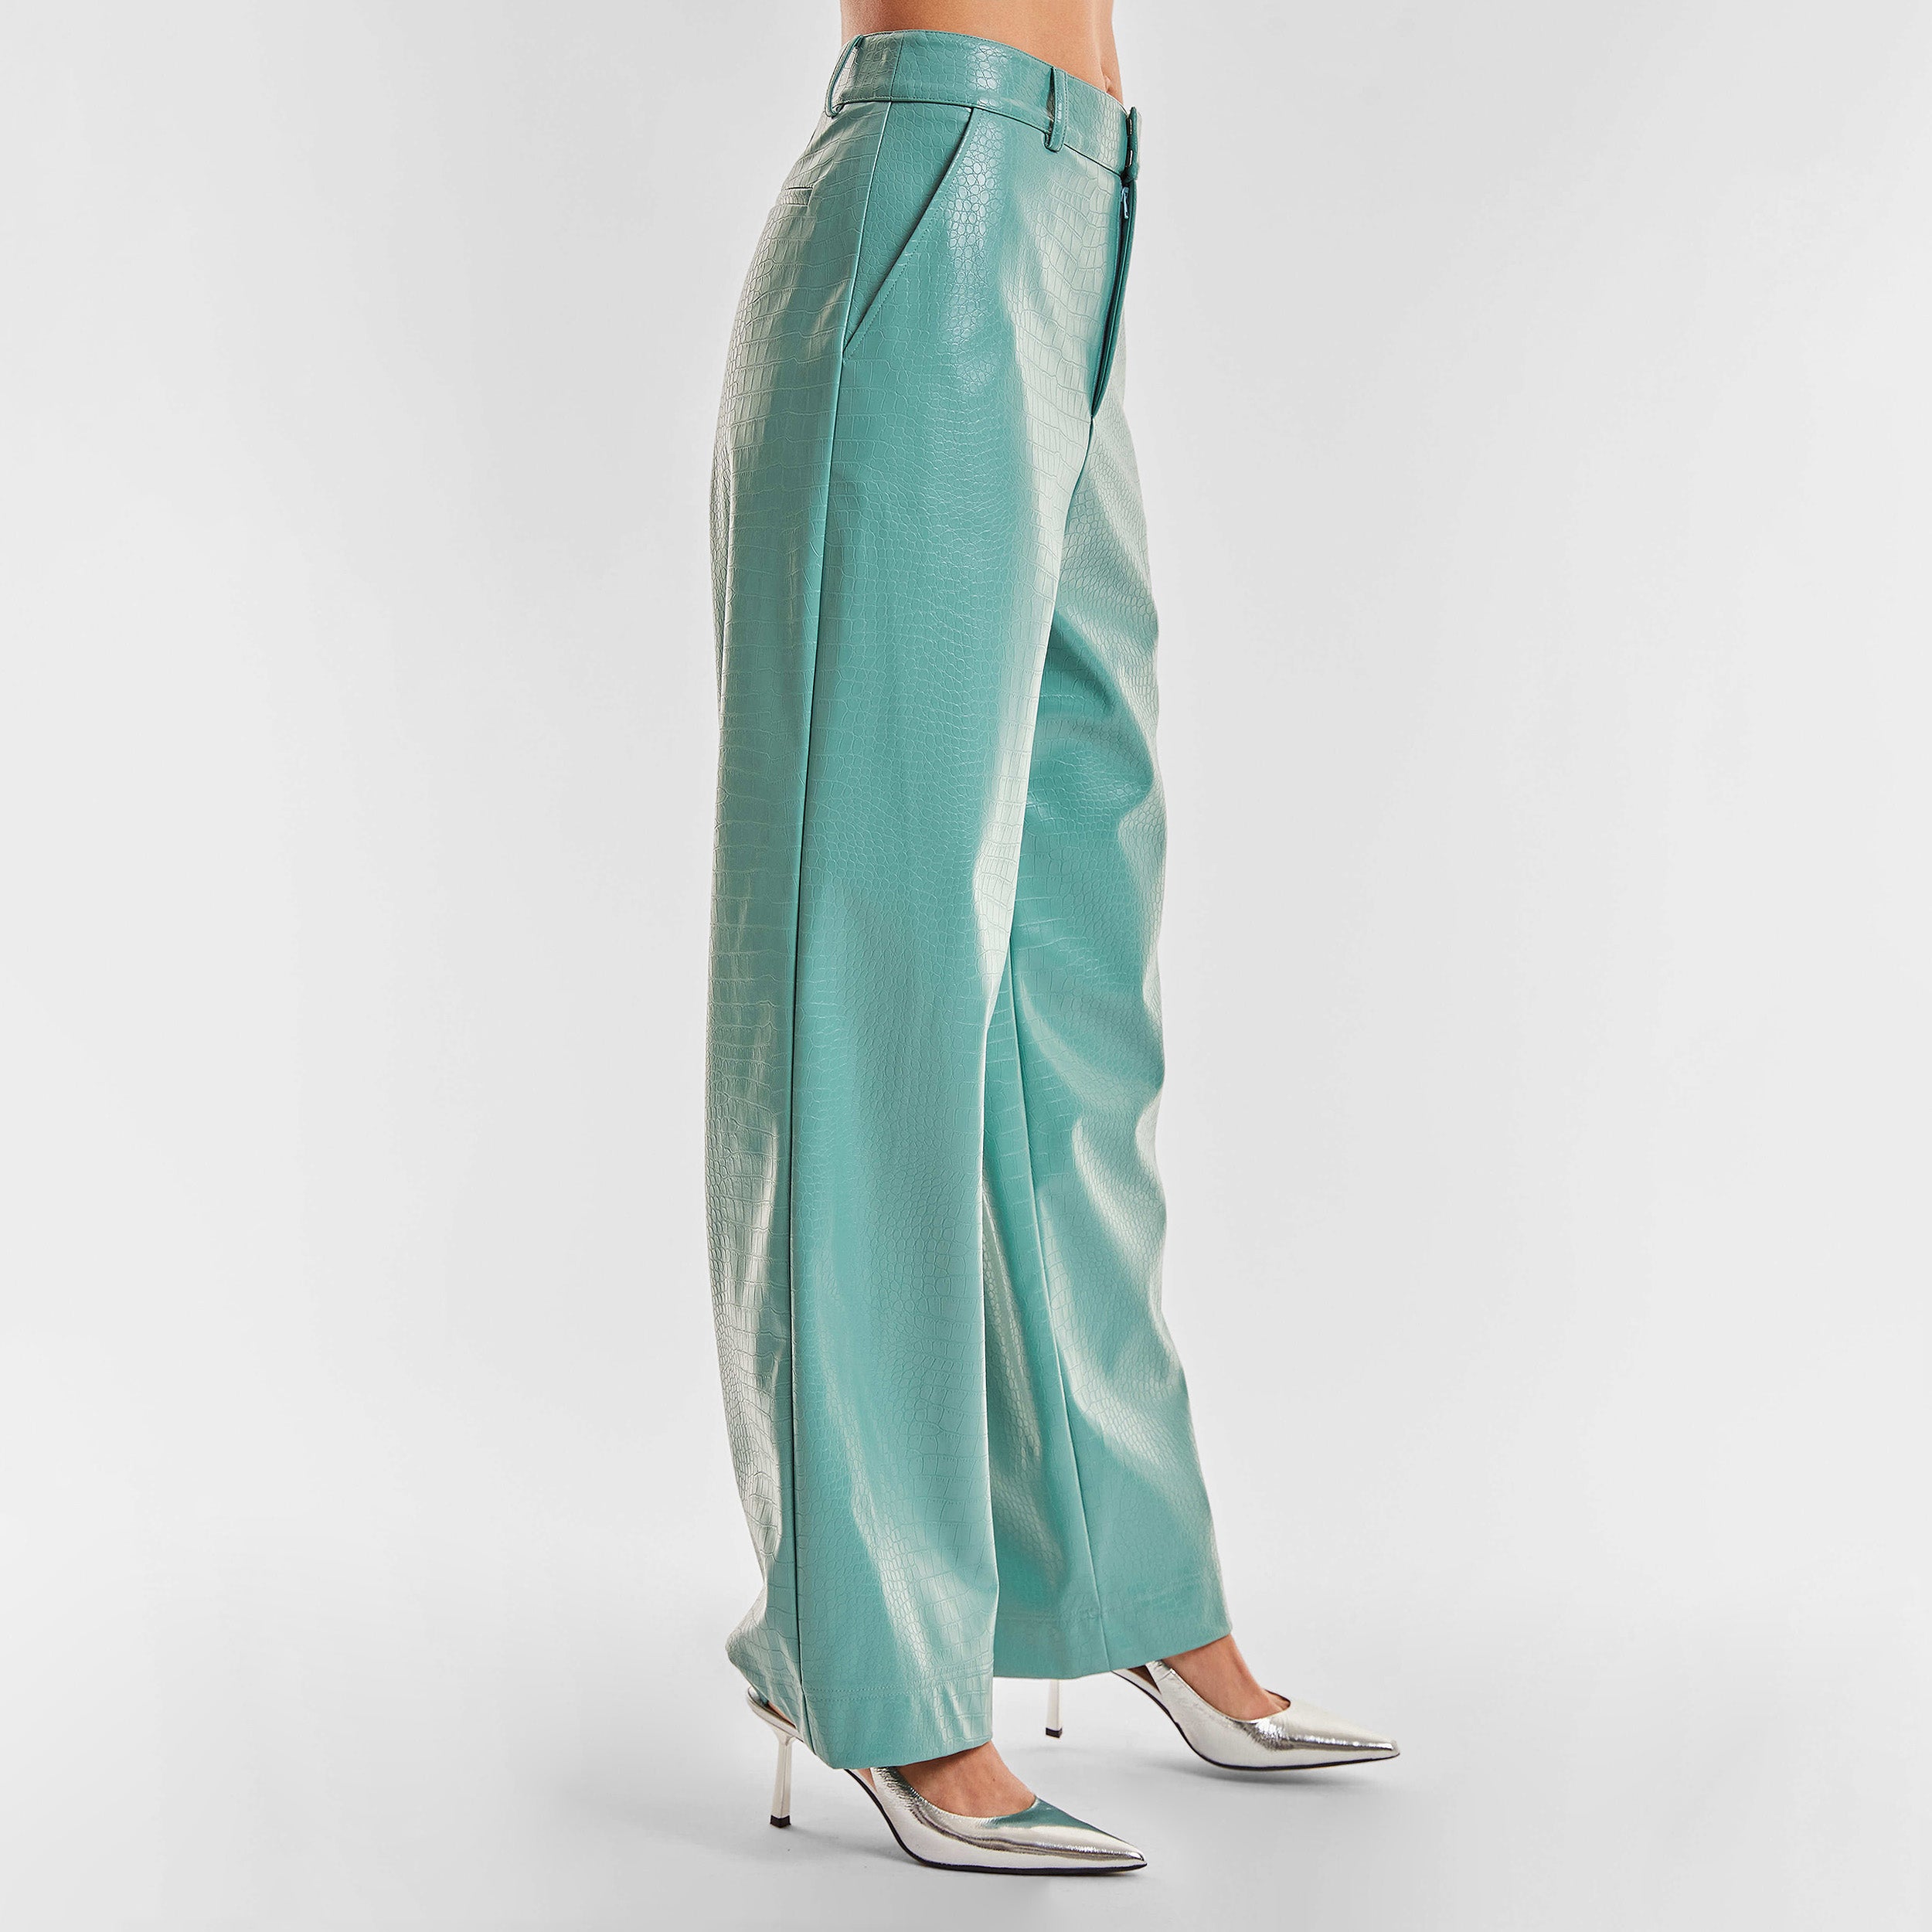 Side view of woman wearing sage colored faux leather croco pattern embossed wide leg pant.